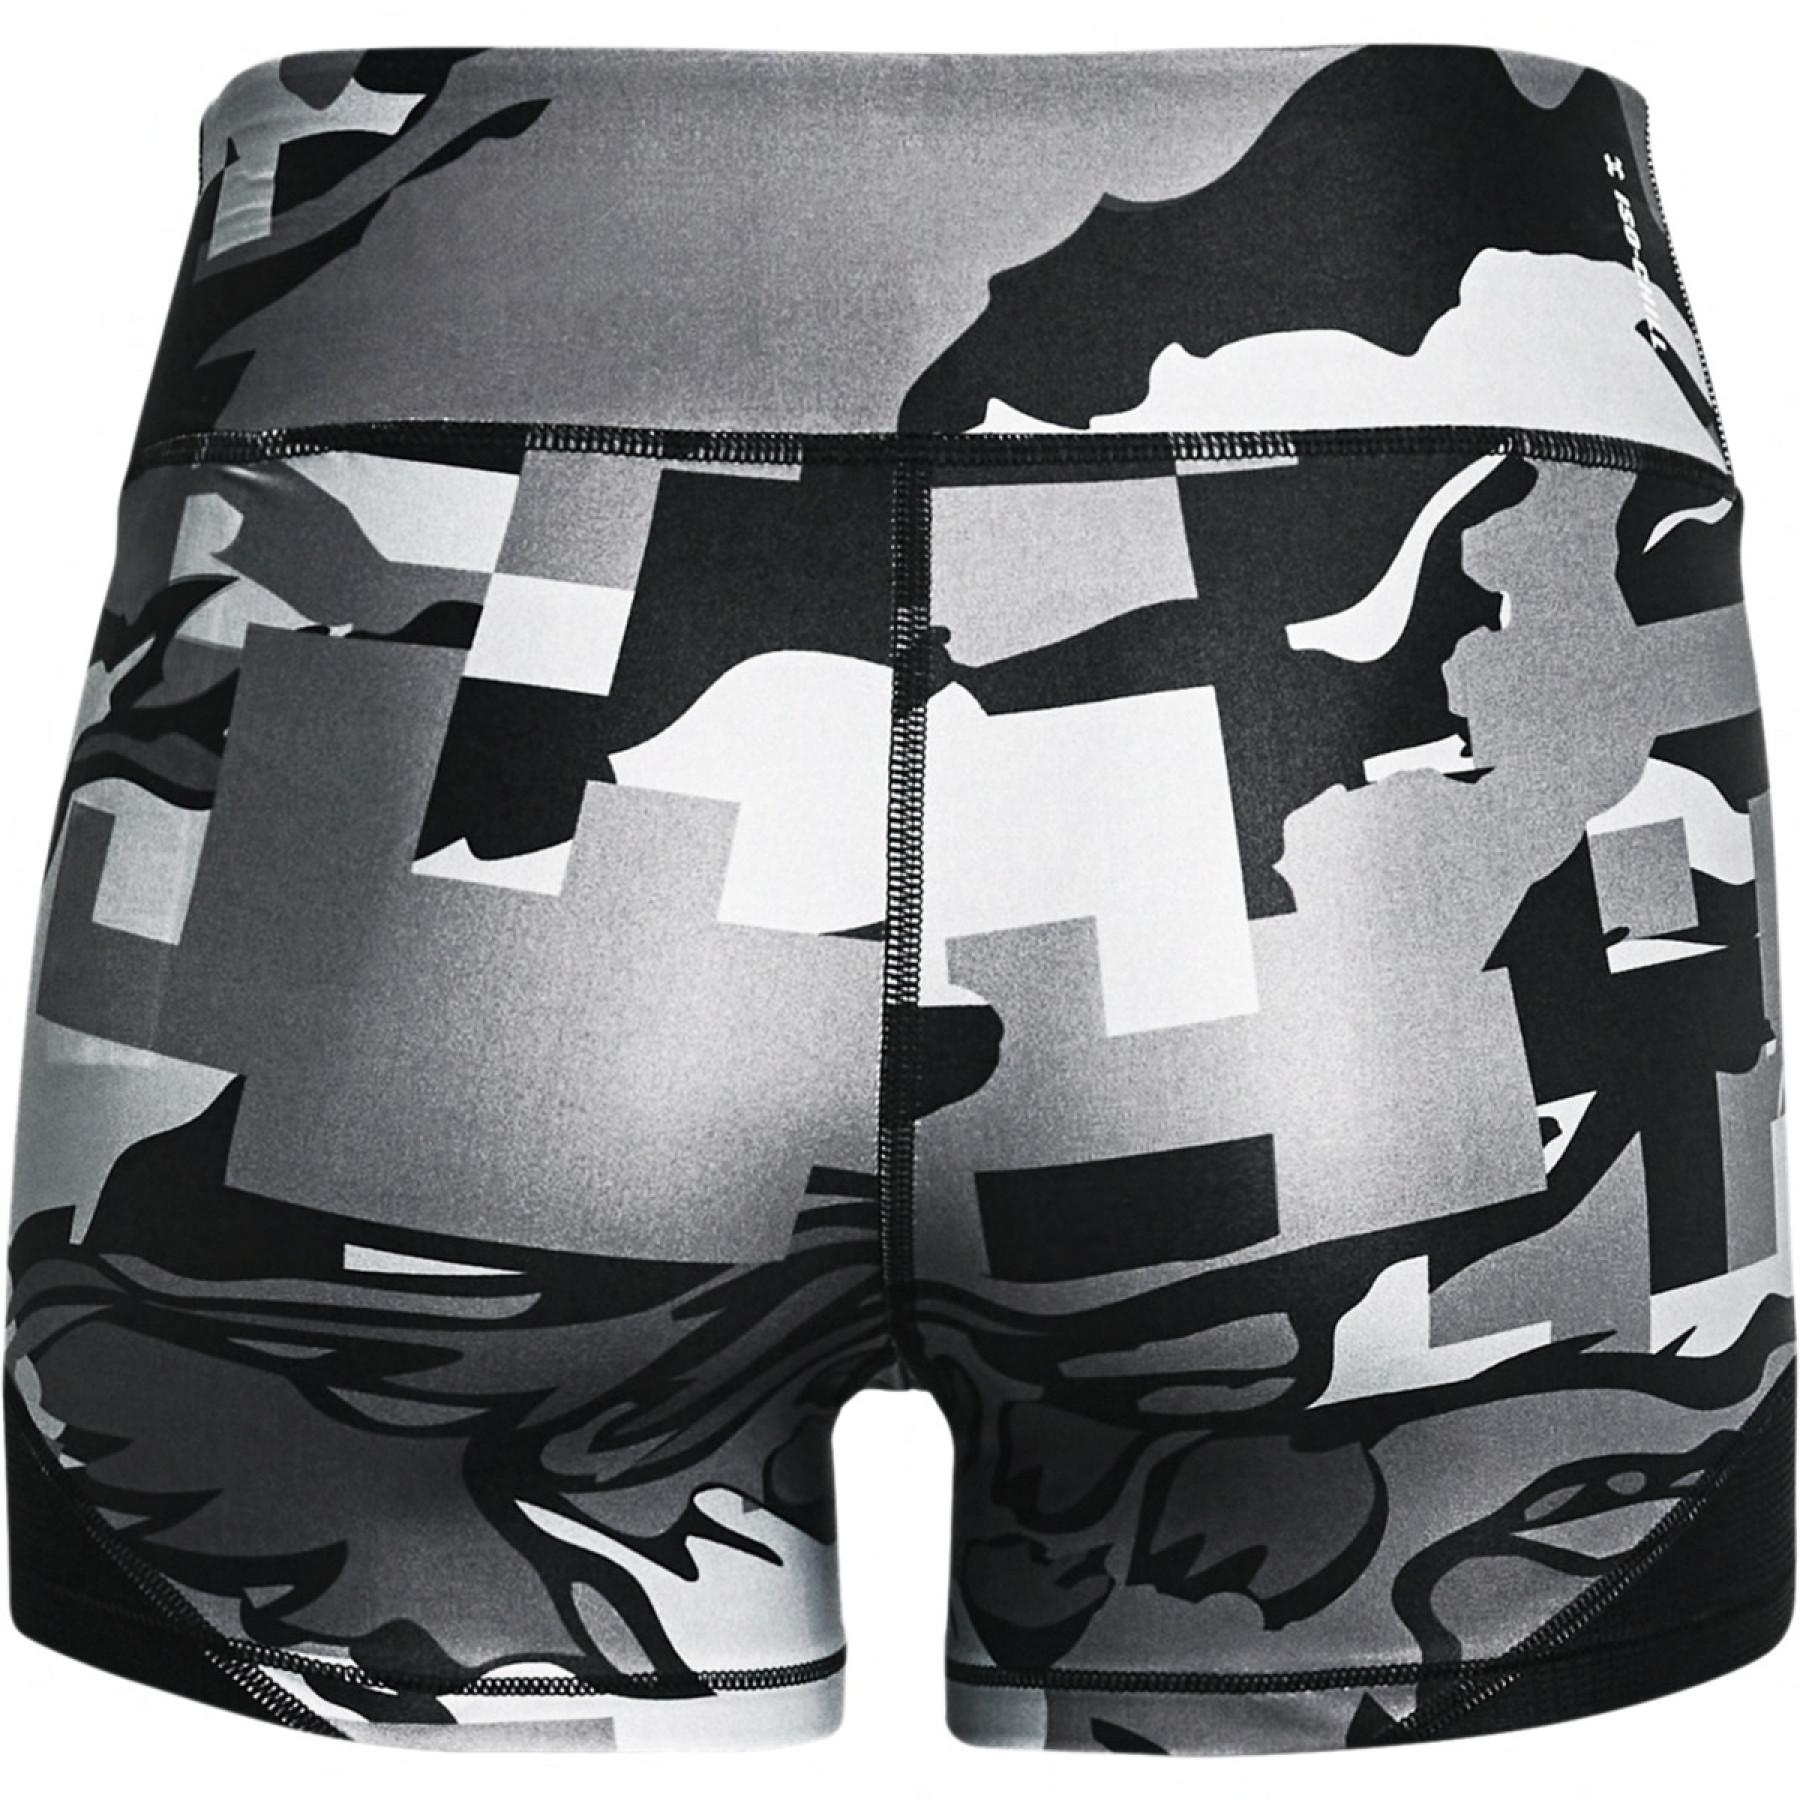 Shorty woman Under Armour iso-chill Team